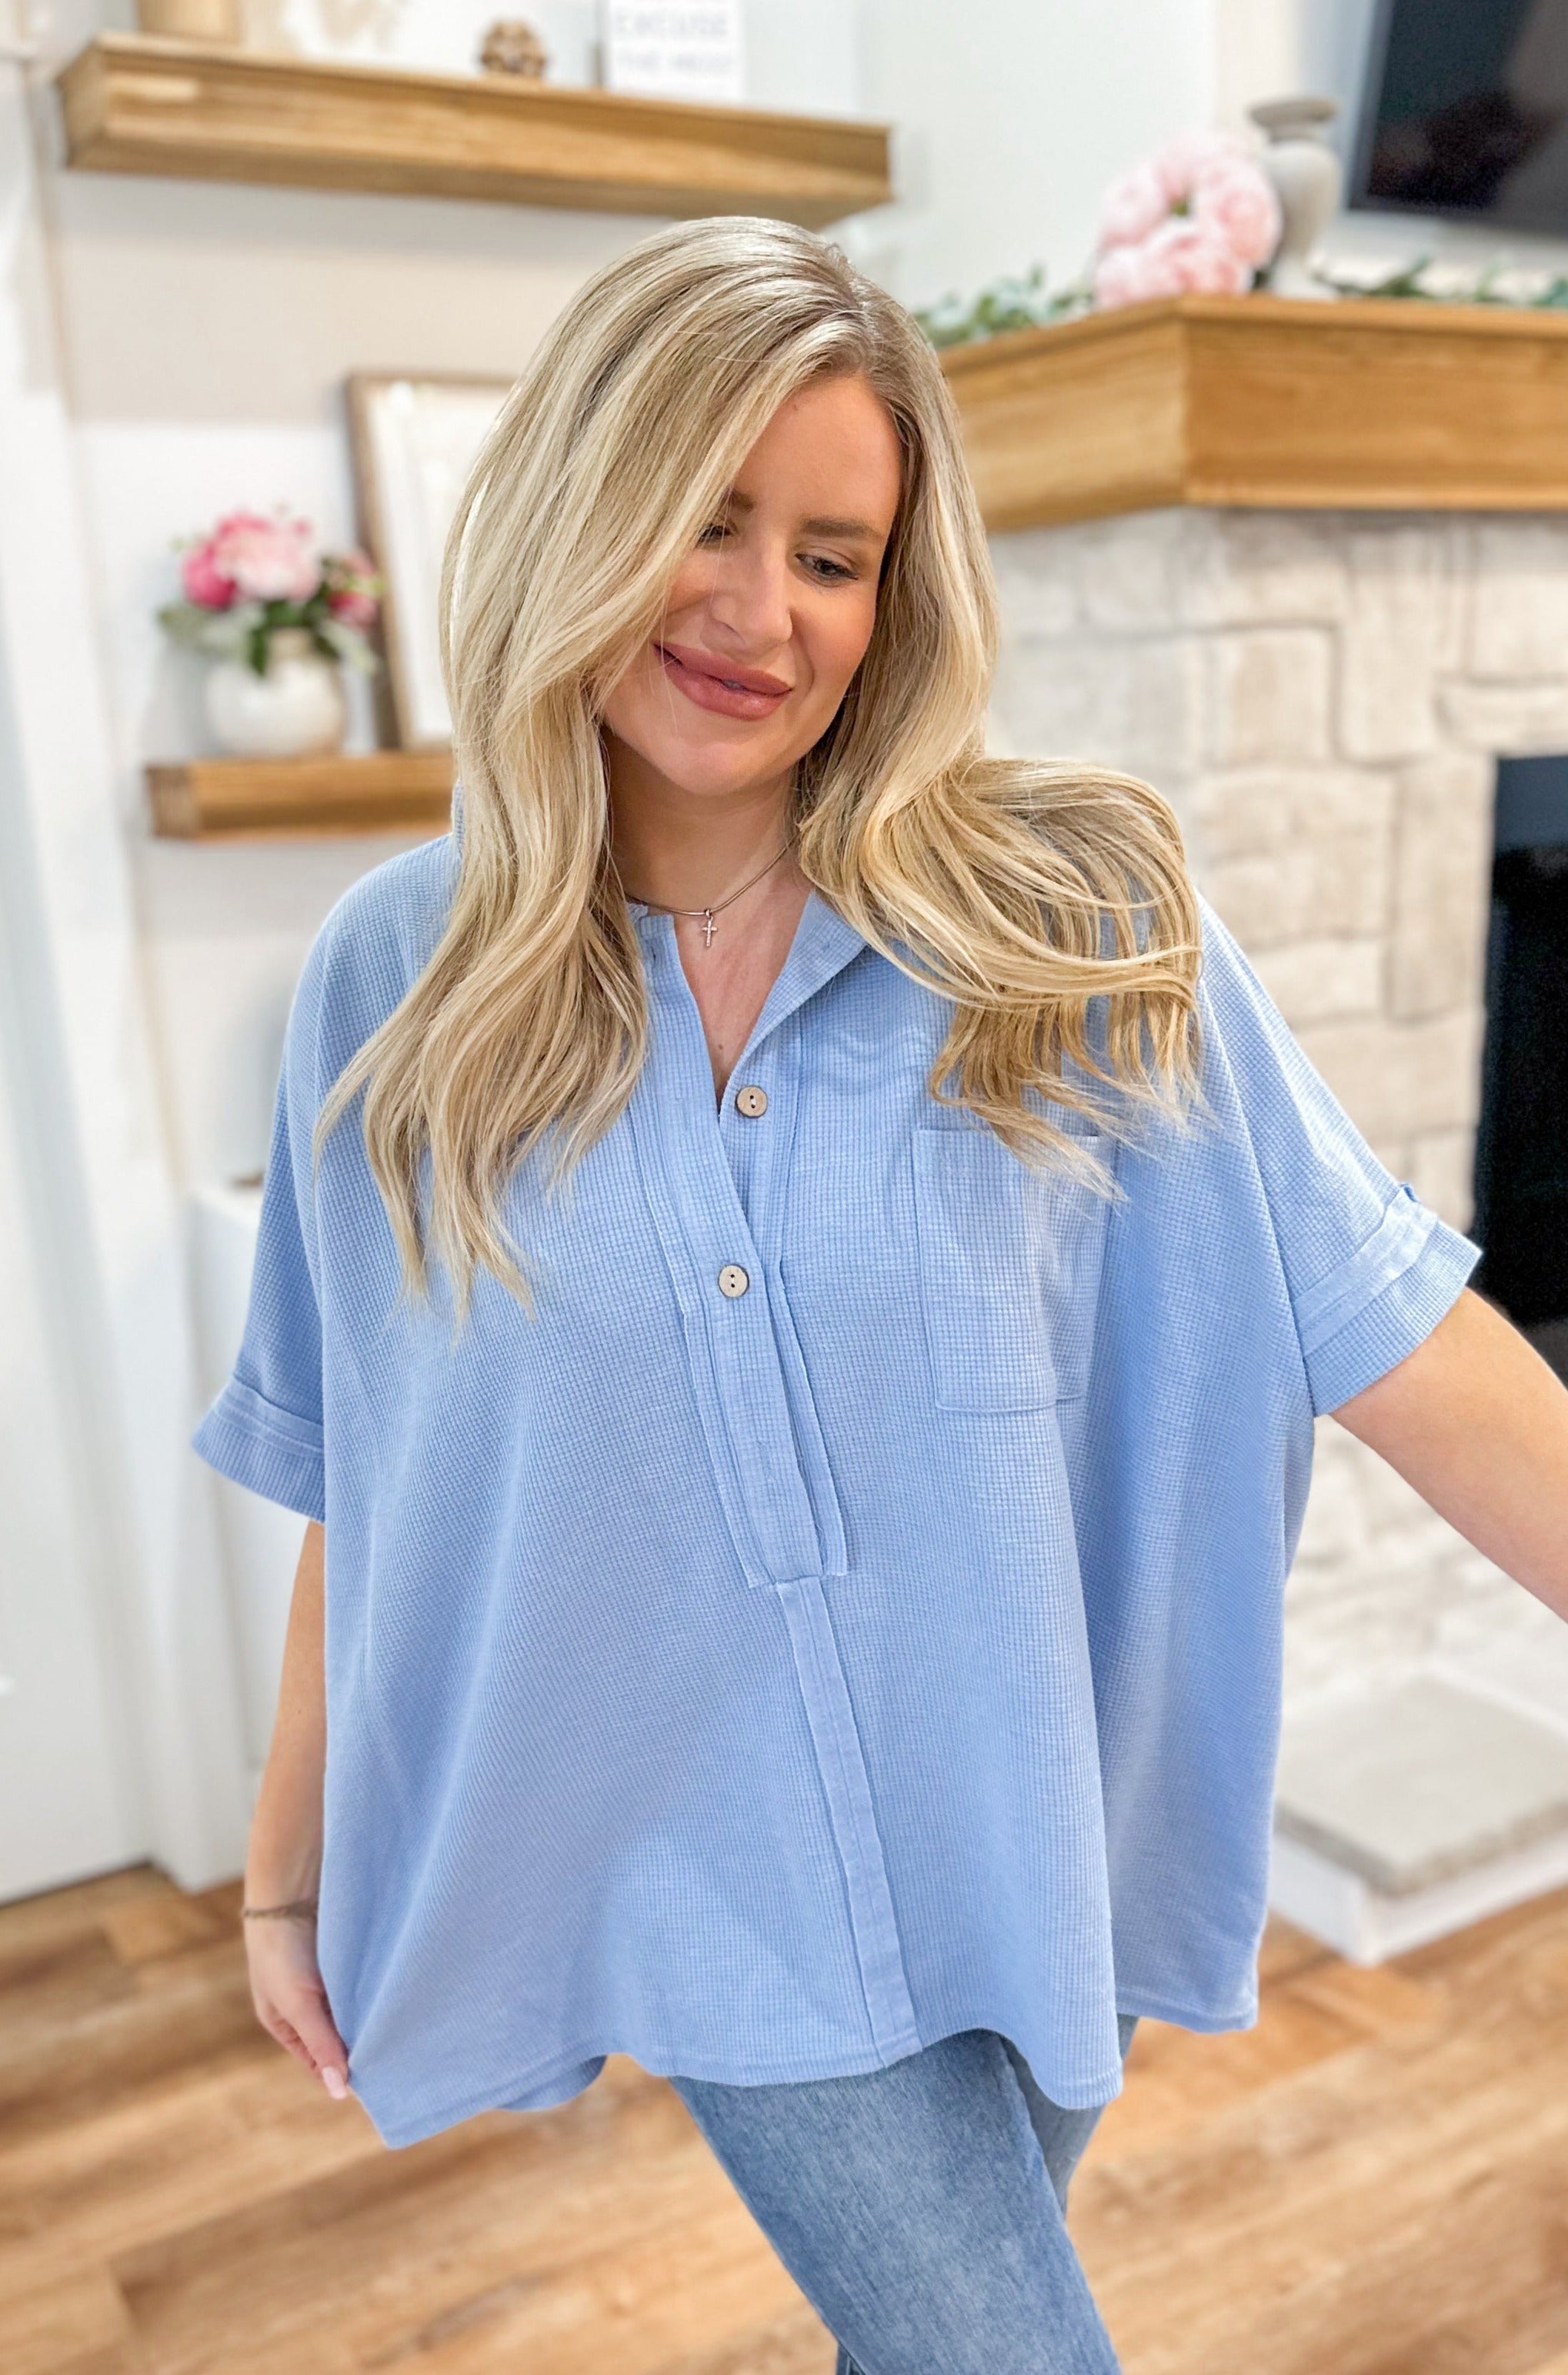 Kimberly Oversized Boxy Cut Button Down Top - Be You Boutique